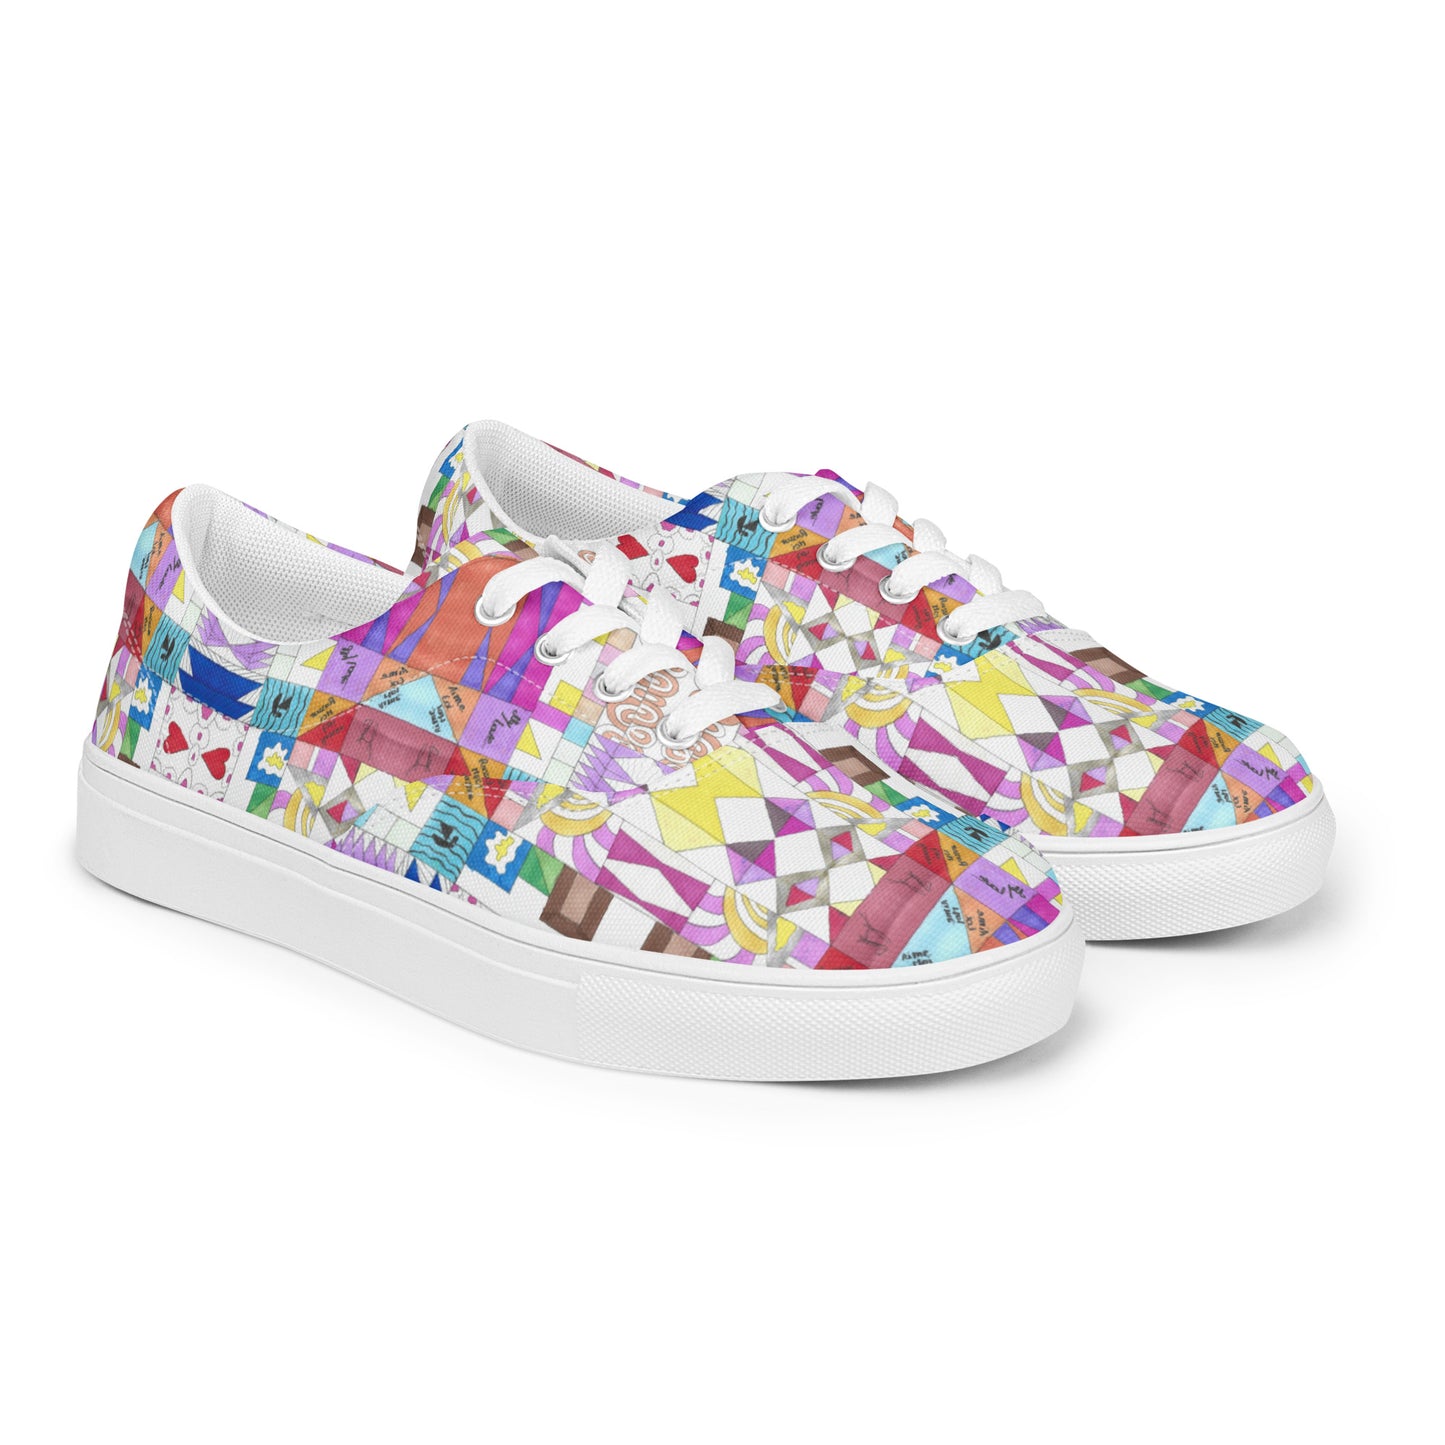 Euphrosynne - Women's canvas tennis shoes with laces